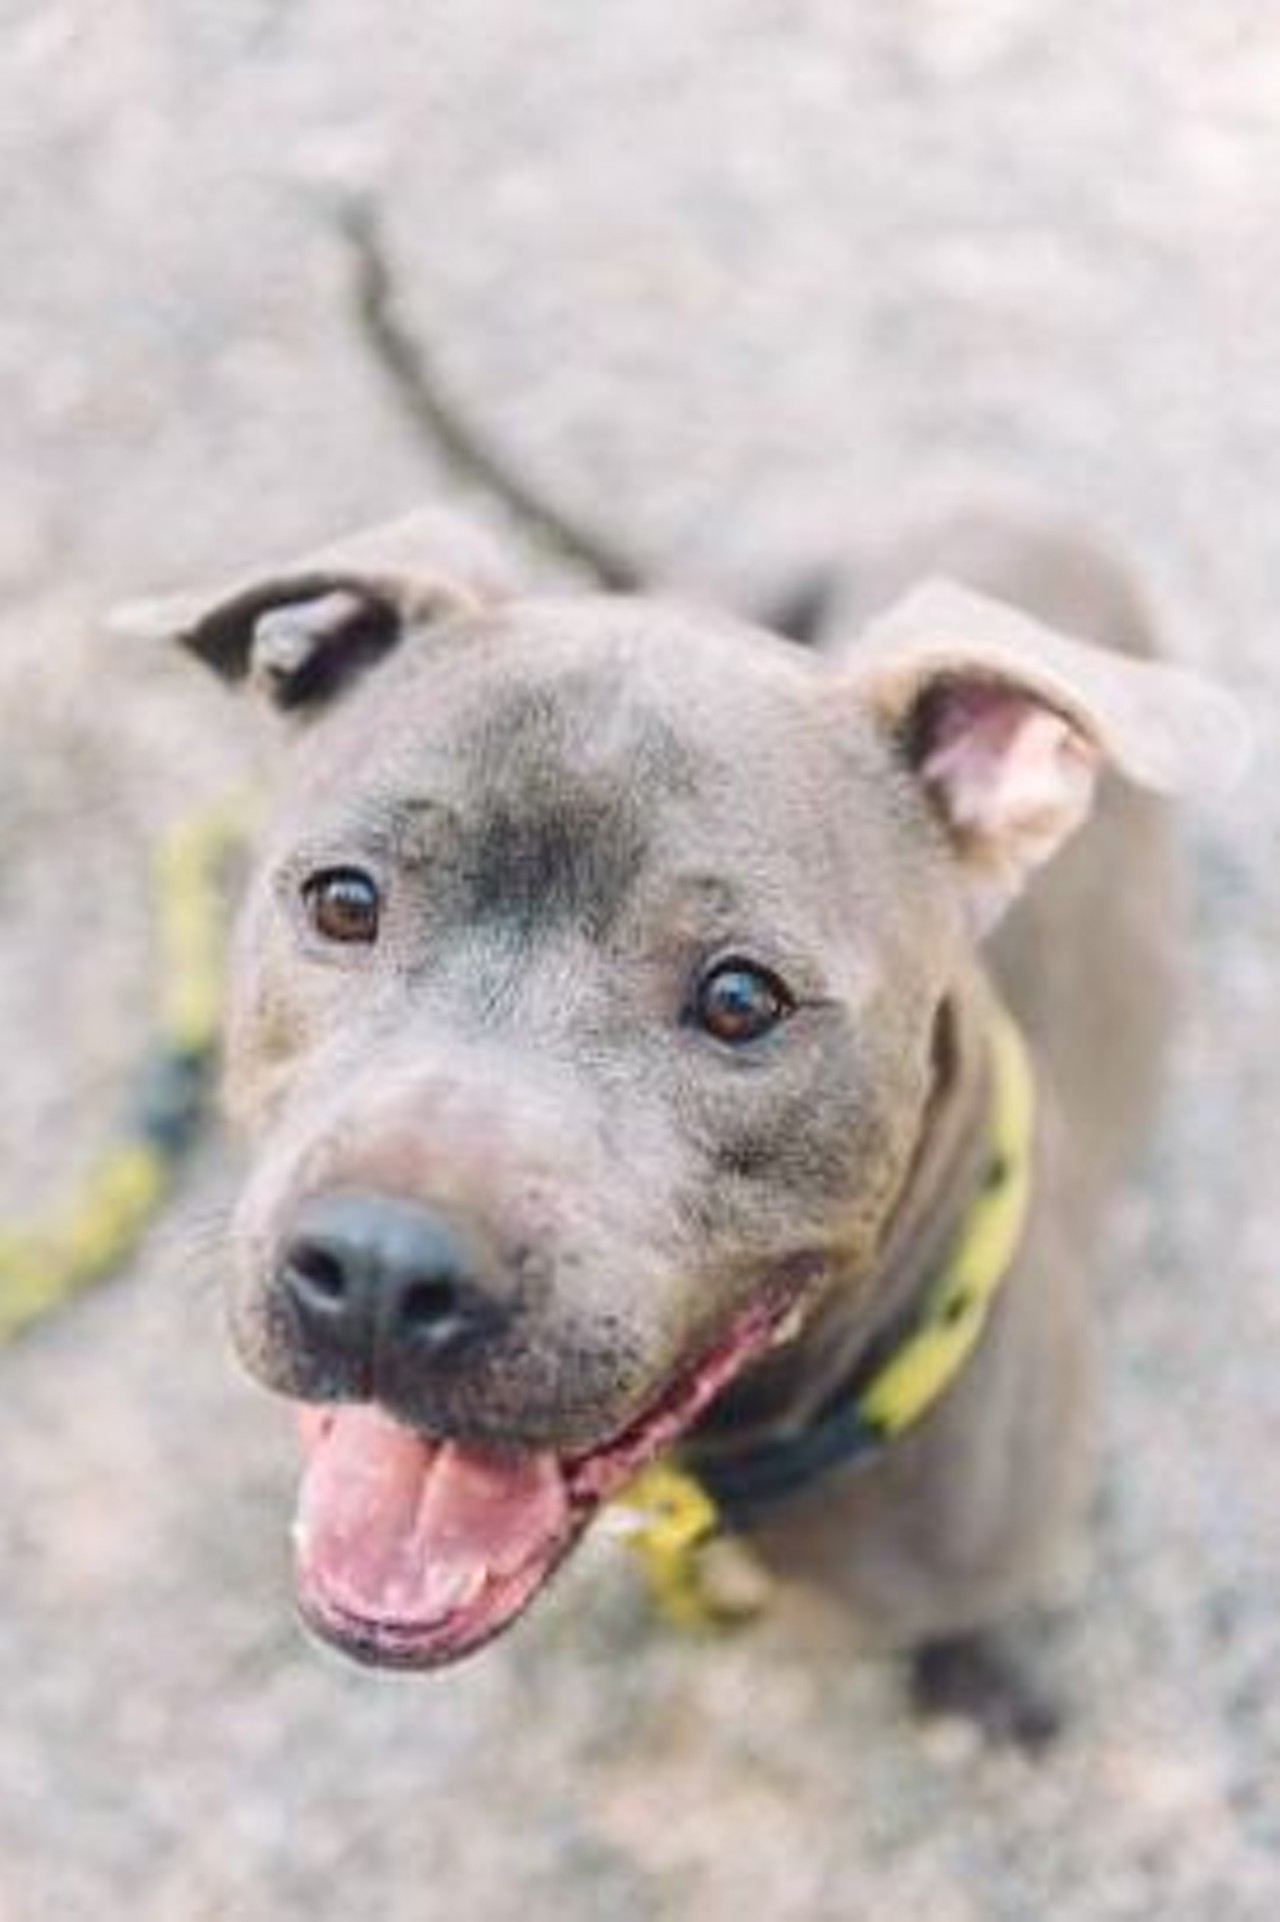  Cesario
7-year-old, Terrier, Pit Bull mix 